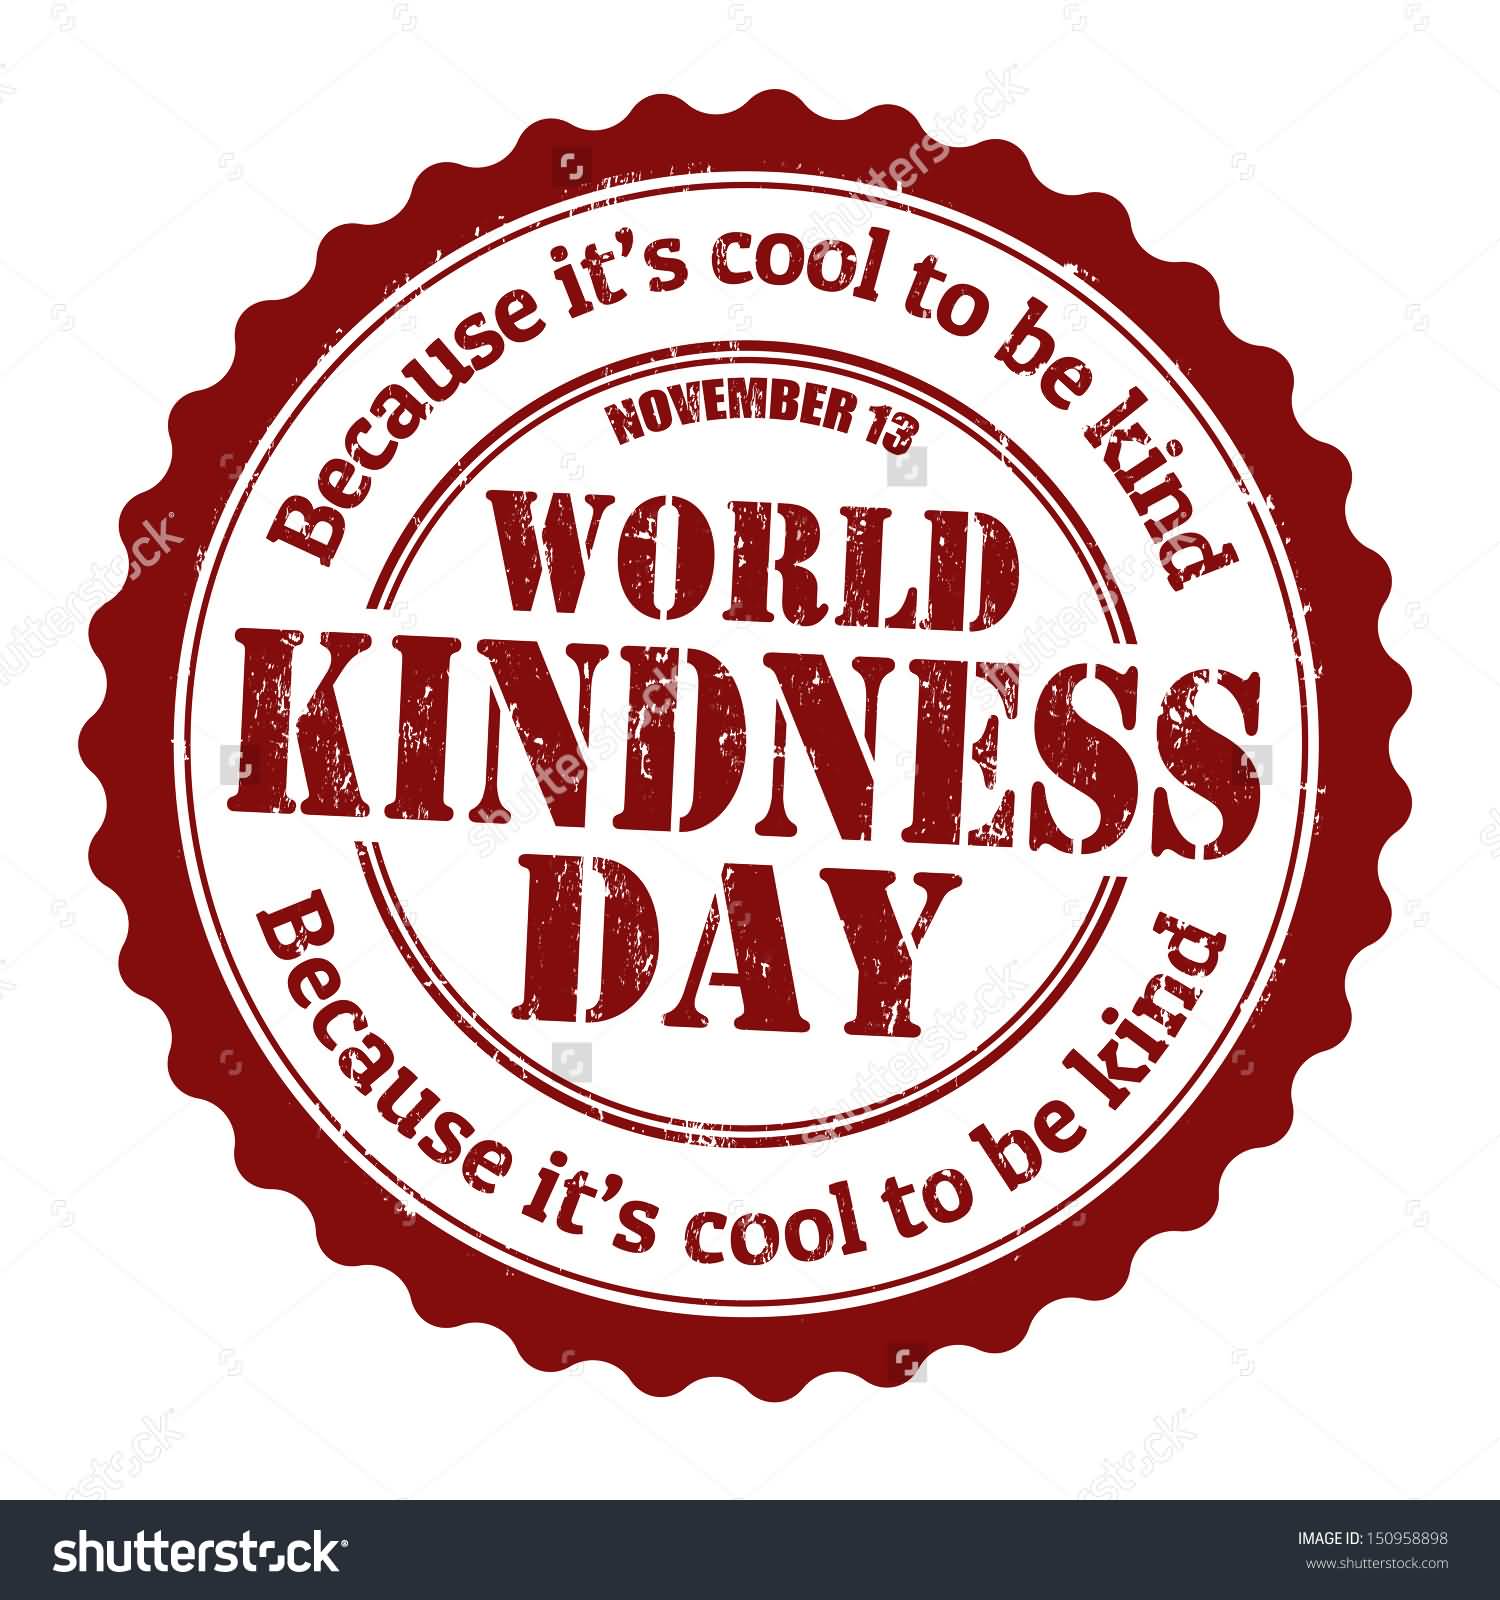 Because It's Cool To Be Kin November 13 World Kindness Day Stamp Picture